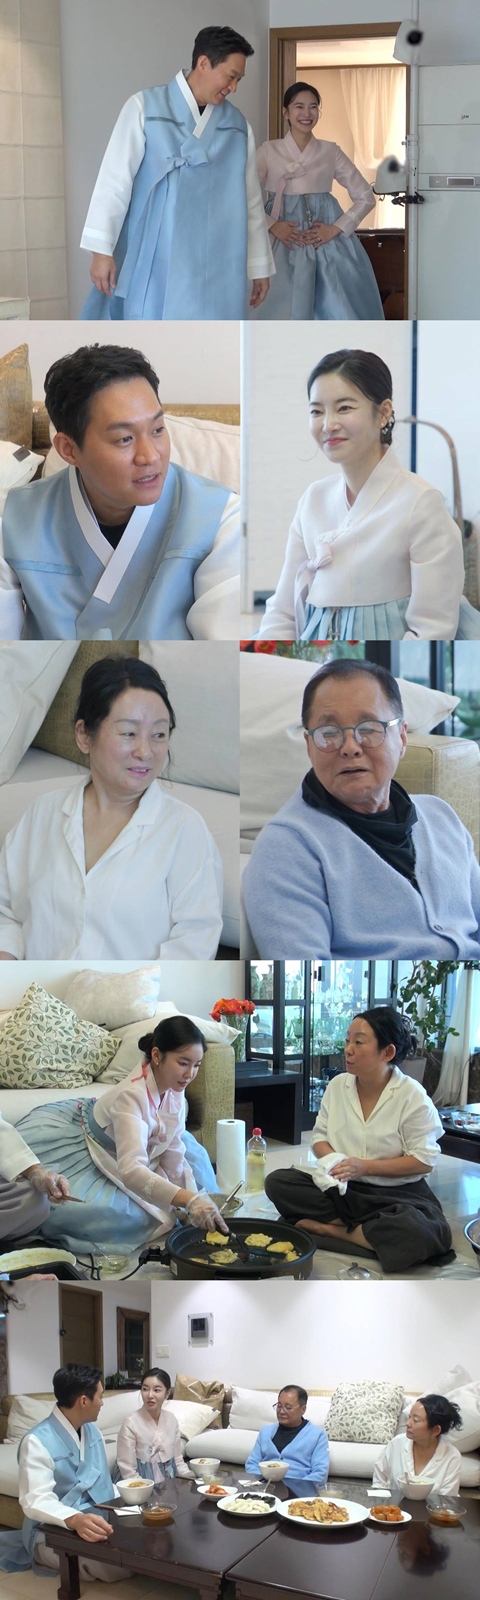 Kim Yoon-ji storms into sudden action of father-in-laws strangeOn the 31st, SBS Same Bed, Different Dreams 22 - You are My Destiny (hereinafter Same Bed, Different Dreams 22) is the first holiday after the marriage of Kim Yoon-ji Choi Woo Sung.Kim Yoon-ji, Choi Woo-sung visited his parents house, Kim Young-im, on the first holiday after marriage.Kim Yoon-ji, who was a brilliant Top Model, was embarrassed to see the ingredients prepared by Kim Young-im, a big hand.The first holiday dish of Kim Yoon-ji, Top Model, will be released on the air, as it started with 100 pieces of the North Korean Mungdujeon and was waiting for a big difficulty to the North Korean cold noodles with three secrets.Also, it was strange that I was impressed by the surprise of the marriage anniversary a while ago, and Kim Young-im came back to the usual tit-for-tat fight and laughed.The two men grew more and more vocal and the atmosphere overheated, so Kim Yoon-ji showed off his term and proposed a strange reconciliation method.Kim Yoon-jis surprise proposal is strange that he jumped up from his seat and tried to escape and was angry.Kim Yoon-jis extraordinary reconciliation method, which angered the strange, raises questions about what will happen.Then Kim Yoon-ji stormed the sudden action of his father-in-law, Lee Sang-hae.Lee Sang-hae suddenly stood up during the meal, and it was the back door that made Kim Yoon-ji as well as Kim Young-im tearful in the immediate action.Kim Yoon-ji, Choi Woo-sungs first holiday story after the twists and turns marriage can be found on SBS Same Bed, Different Dreams 22 which is broadcasted at 10:30 pm on the 31st.